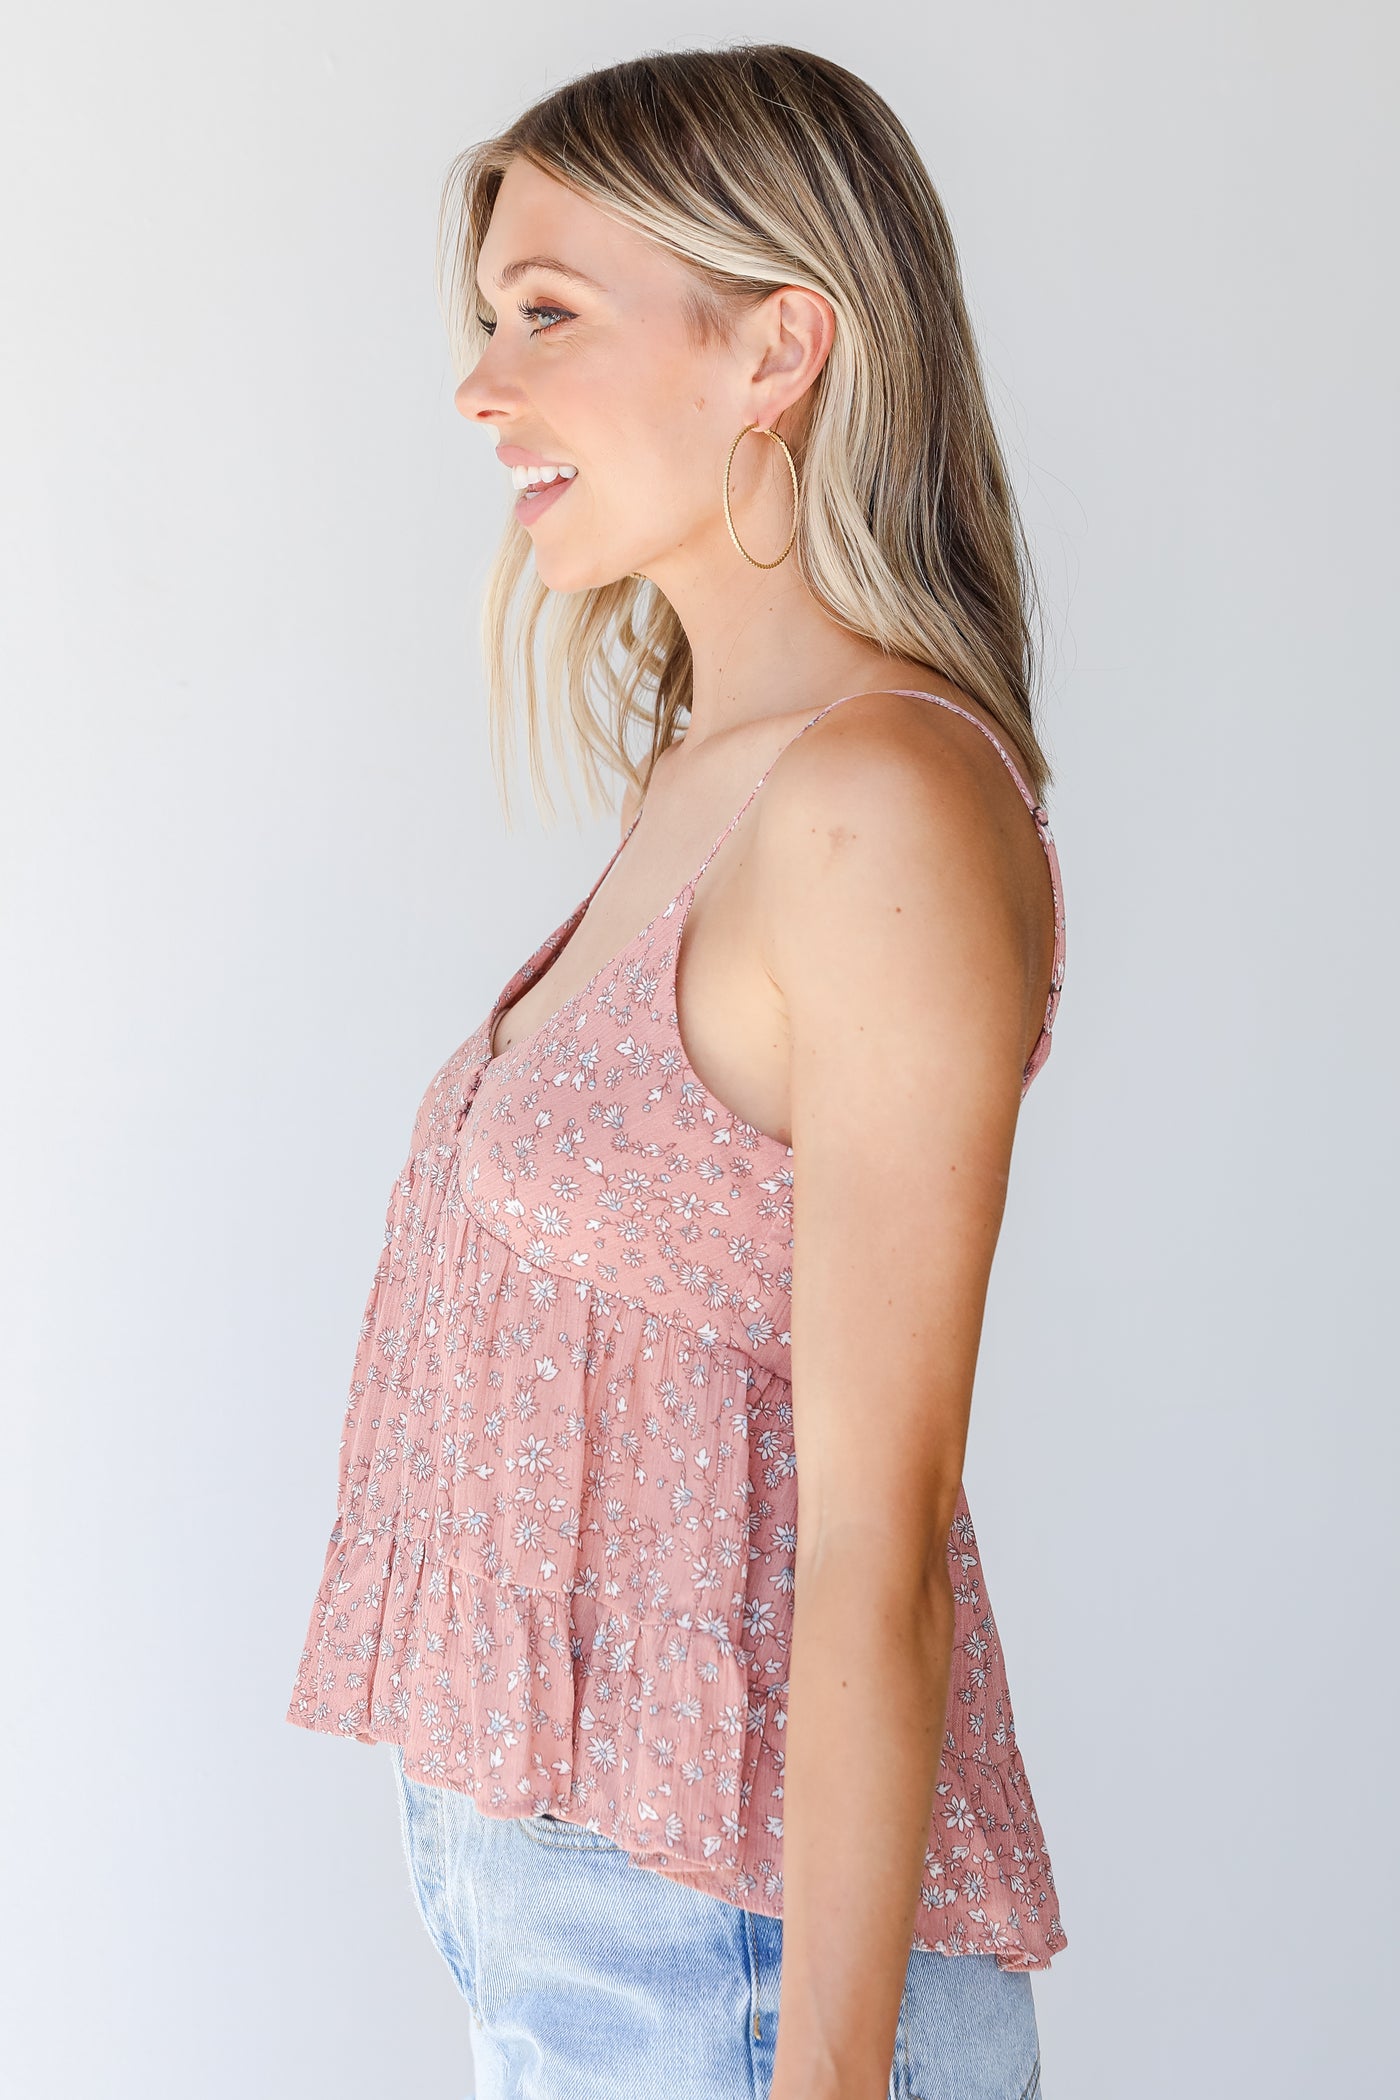 Floral Tank in blush side view